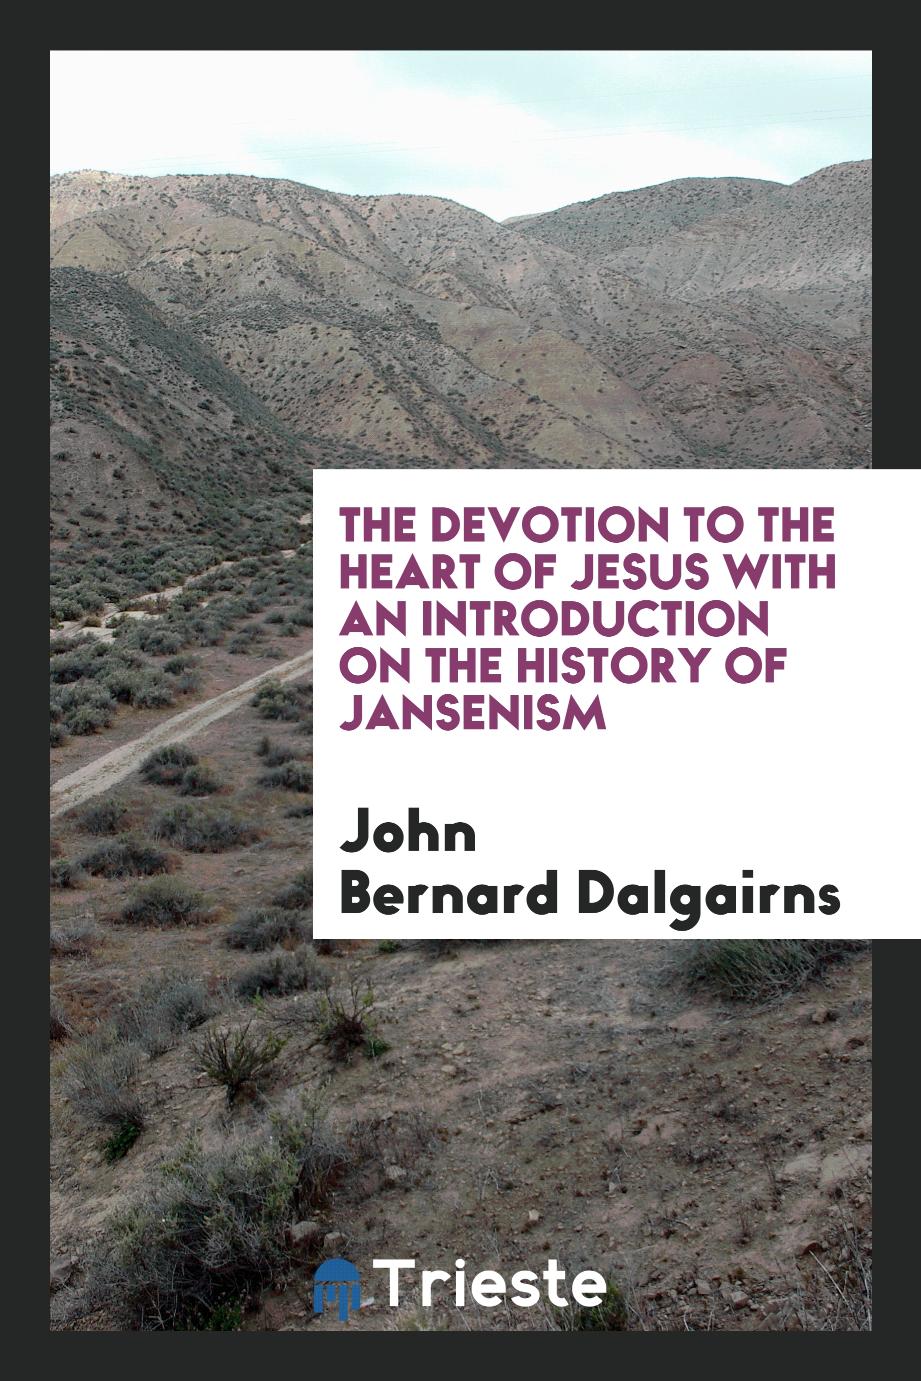 The devotion to the Heart of Jesus with an introduction on the history of Jansenism